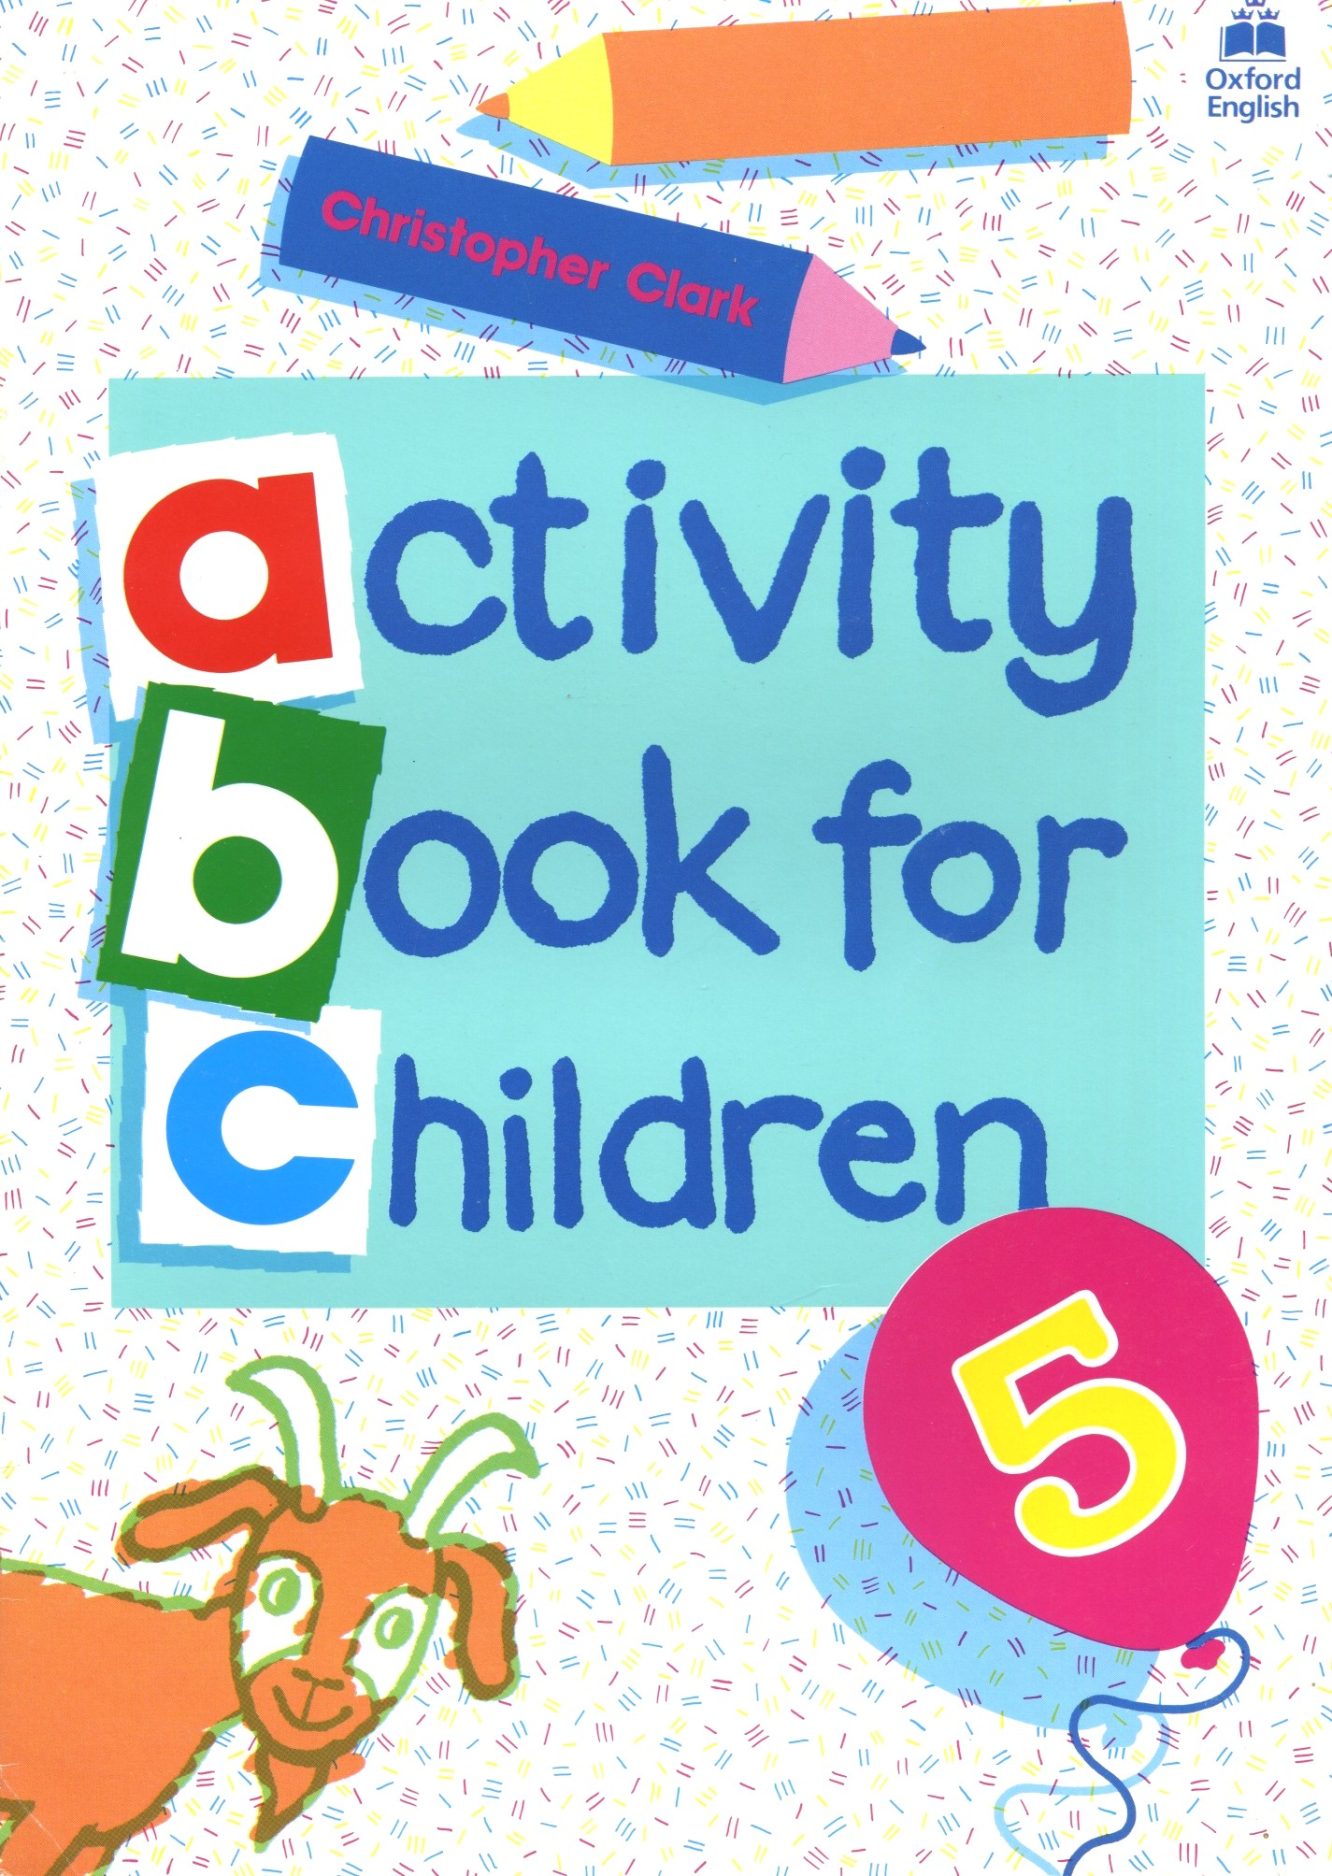 Rich Results on Google's SERP when searching for 'Activity Books for Children 5'